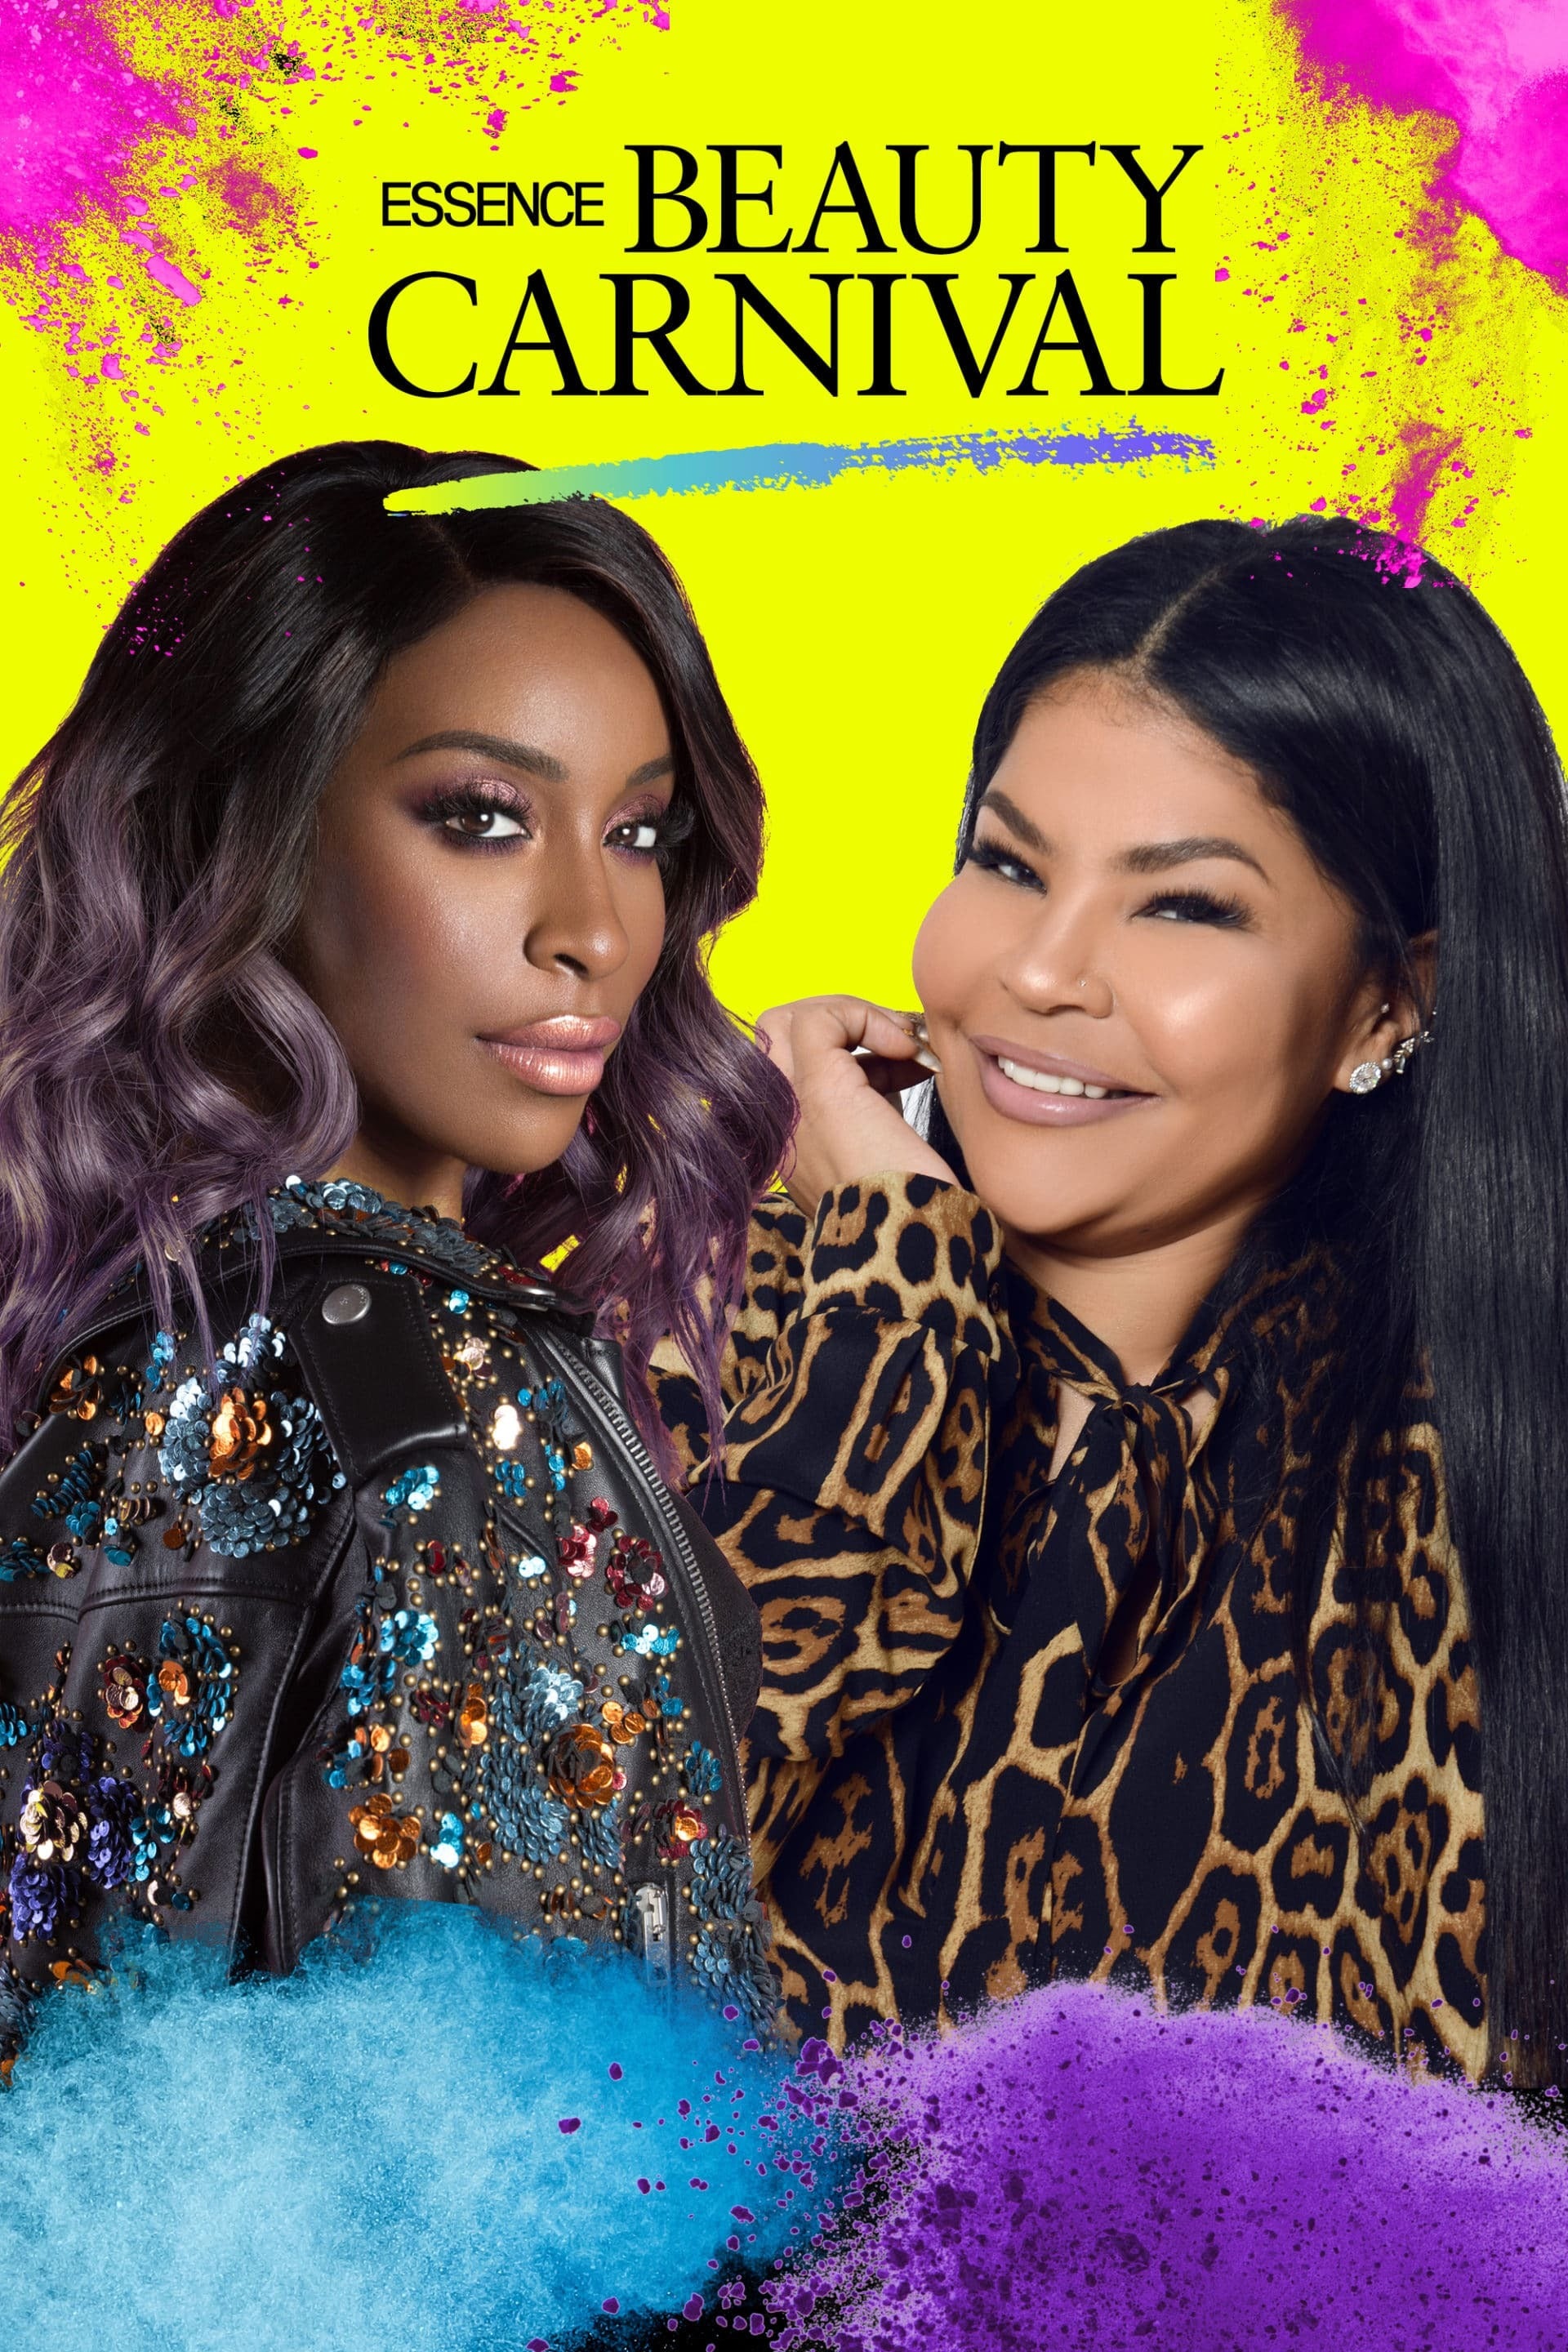 Jackie Aina, Misa Hylton & More Added To ESSENCE Beauty Carnival Lineup For NYC